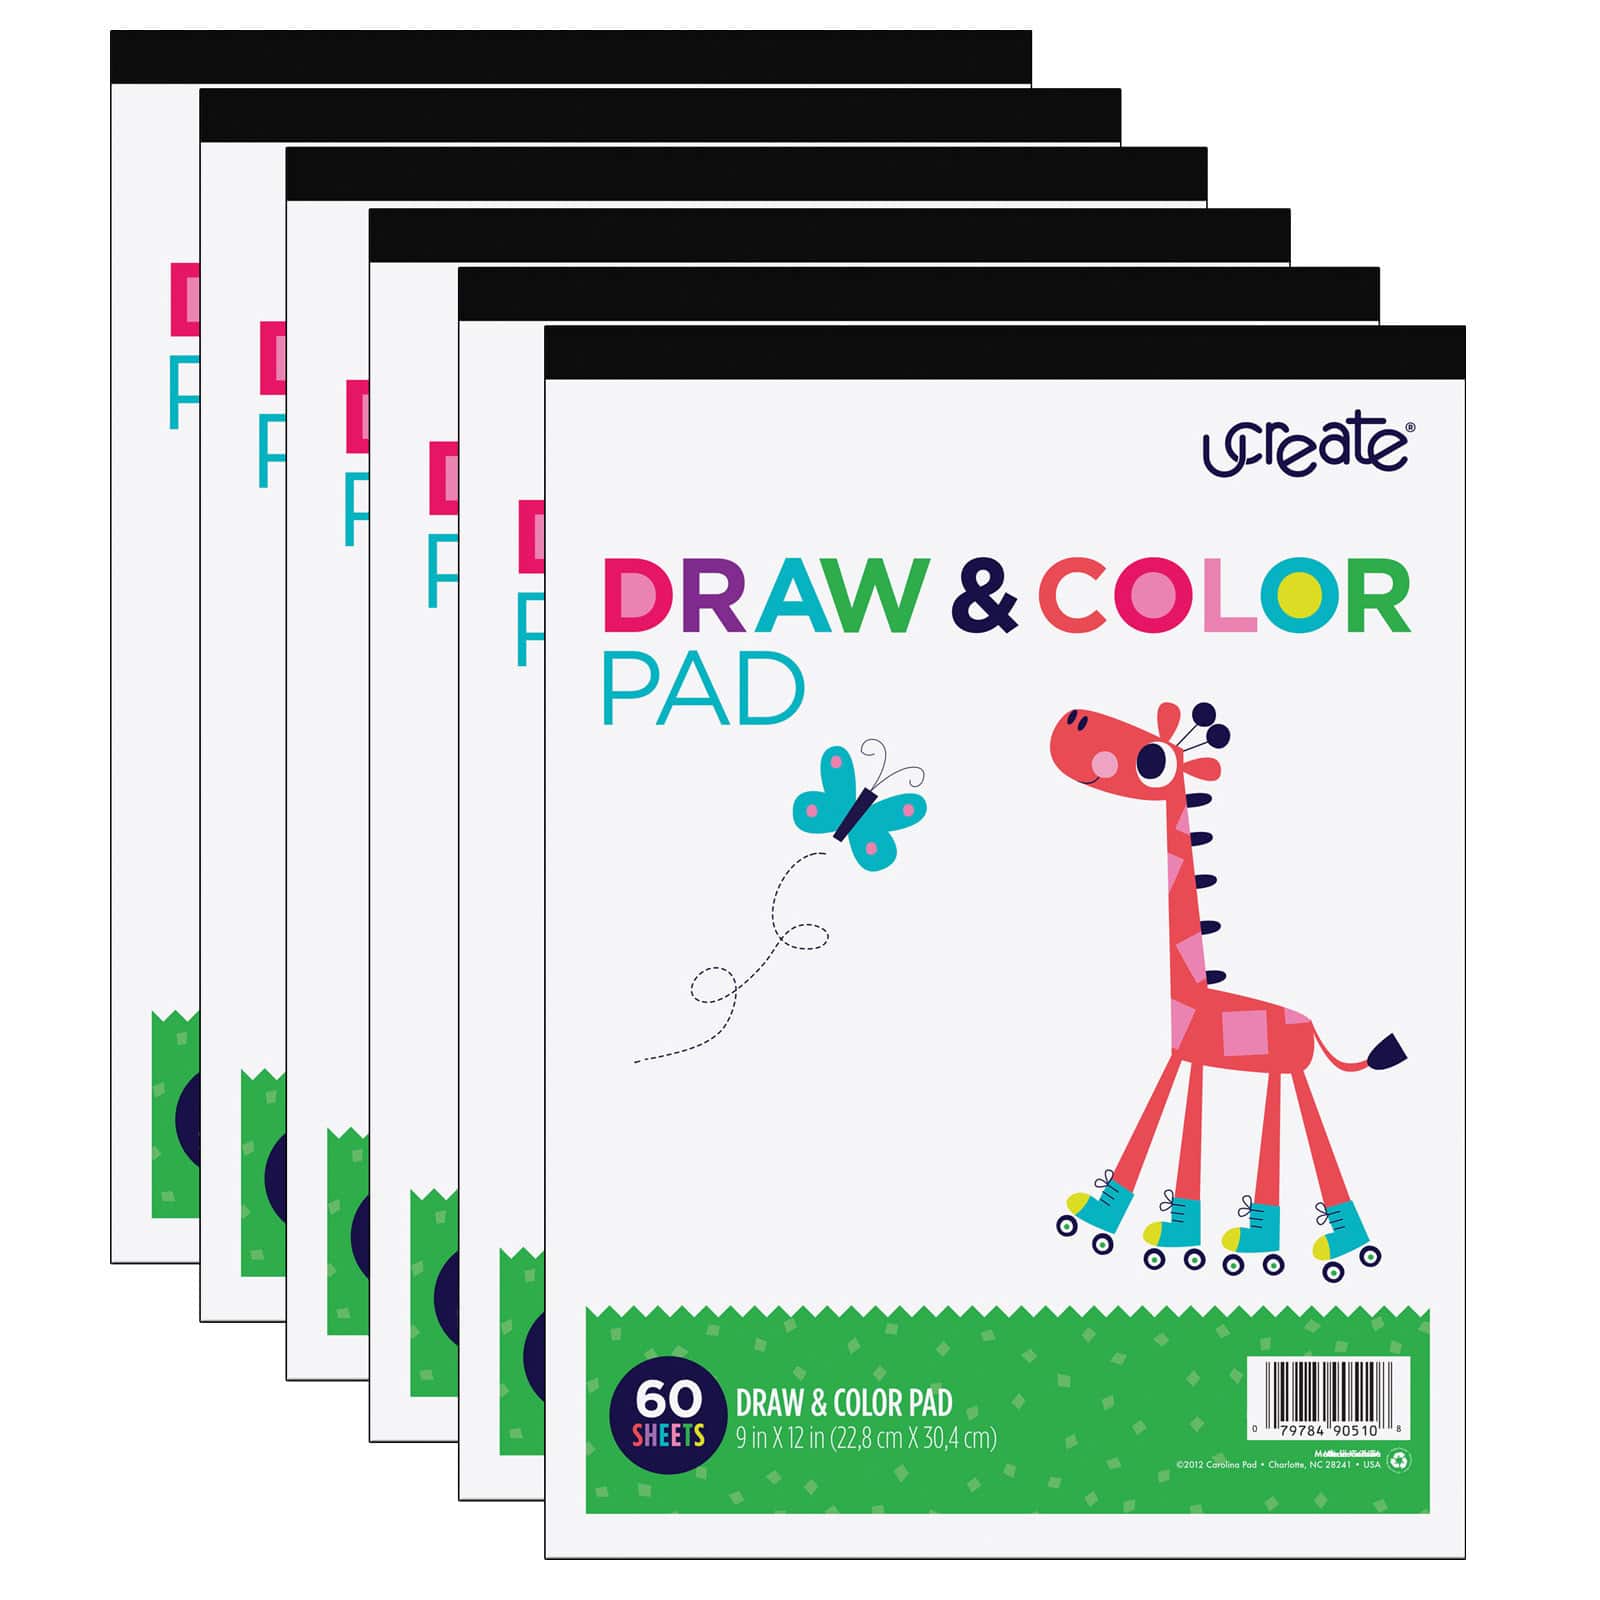 Pacon® UCreate® 9 x 12 Draw & Color Pad, 6ct.